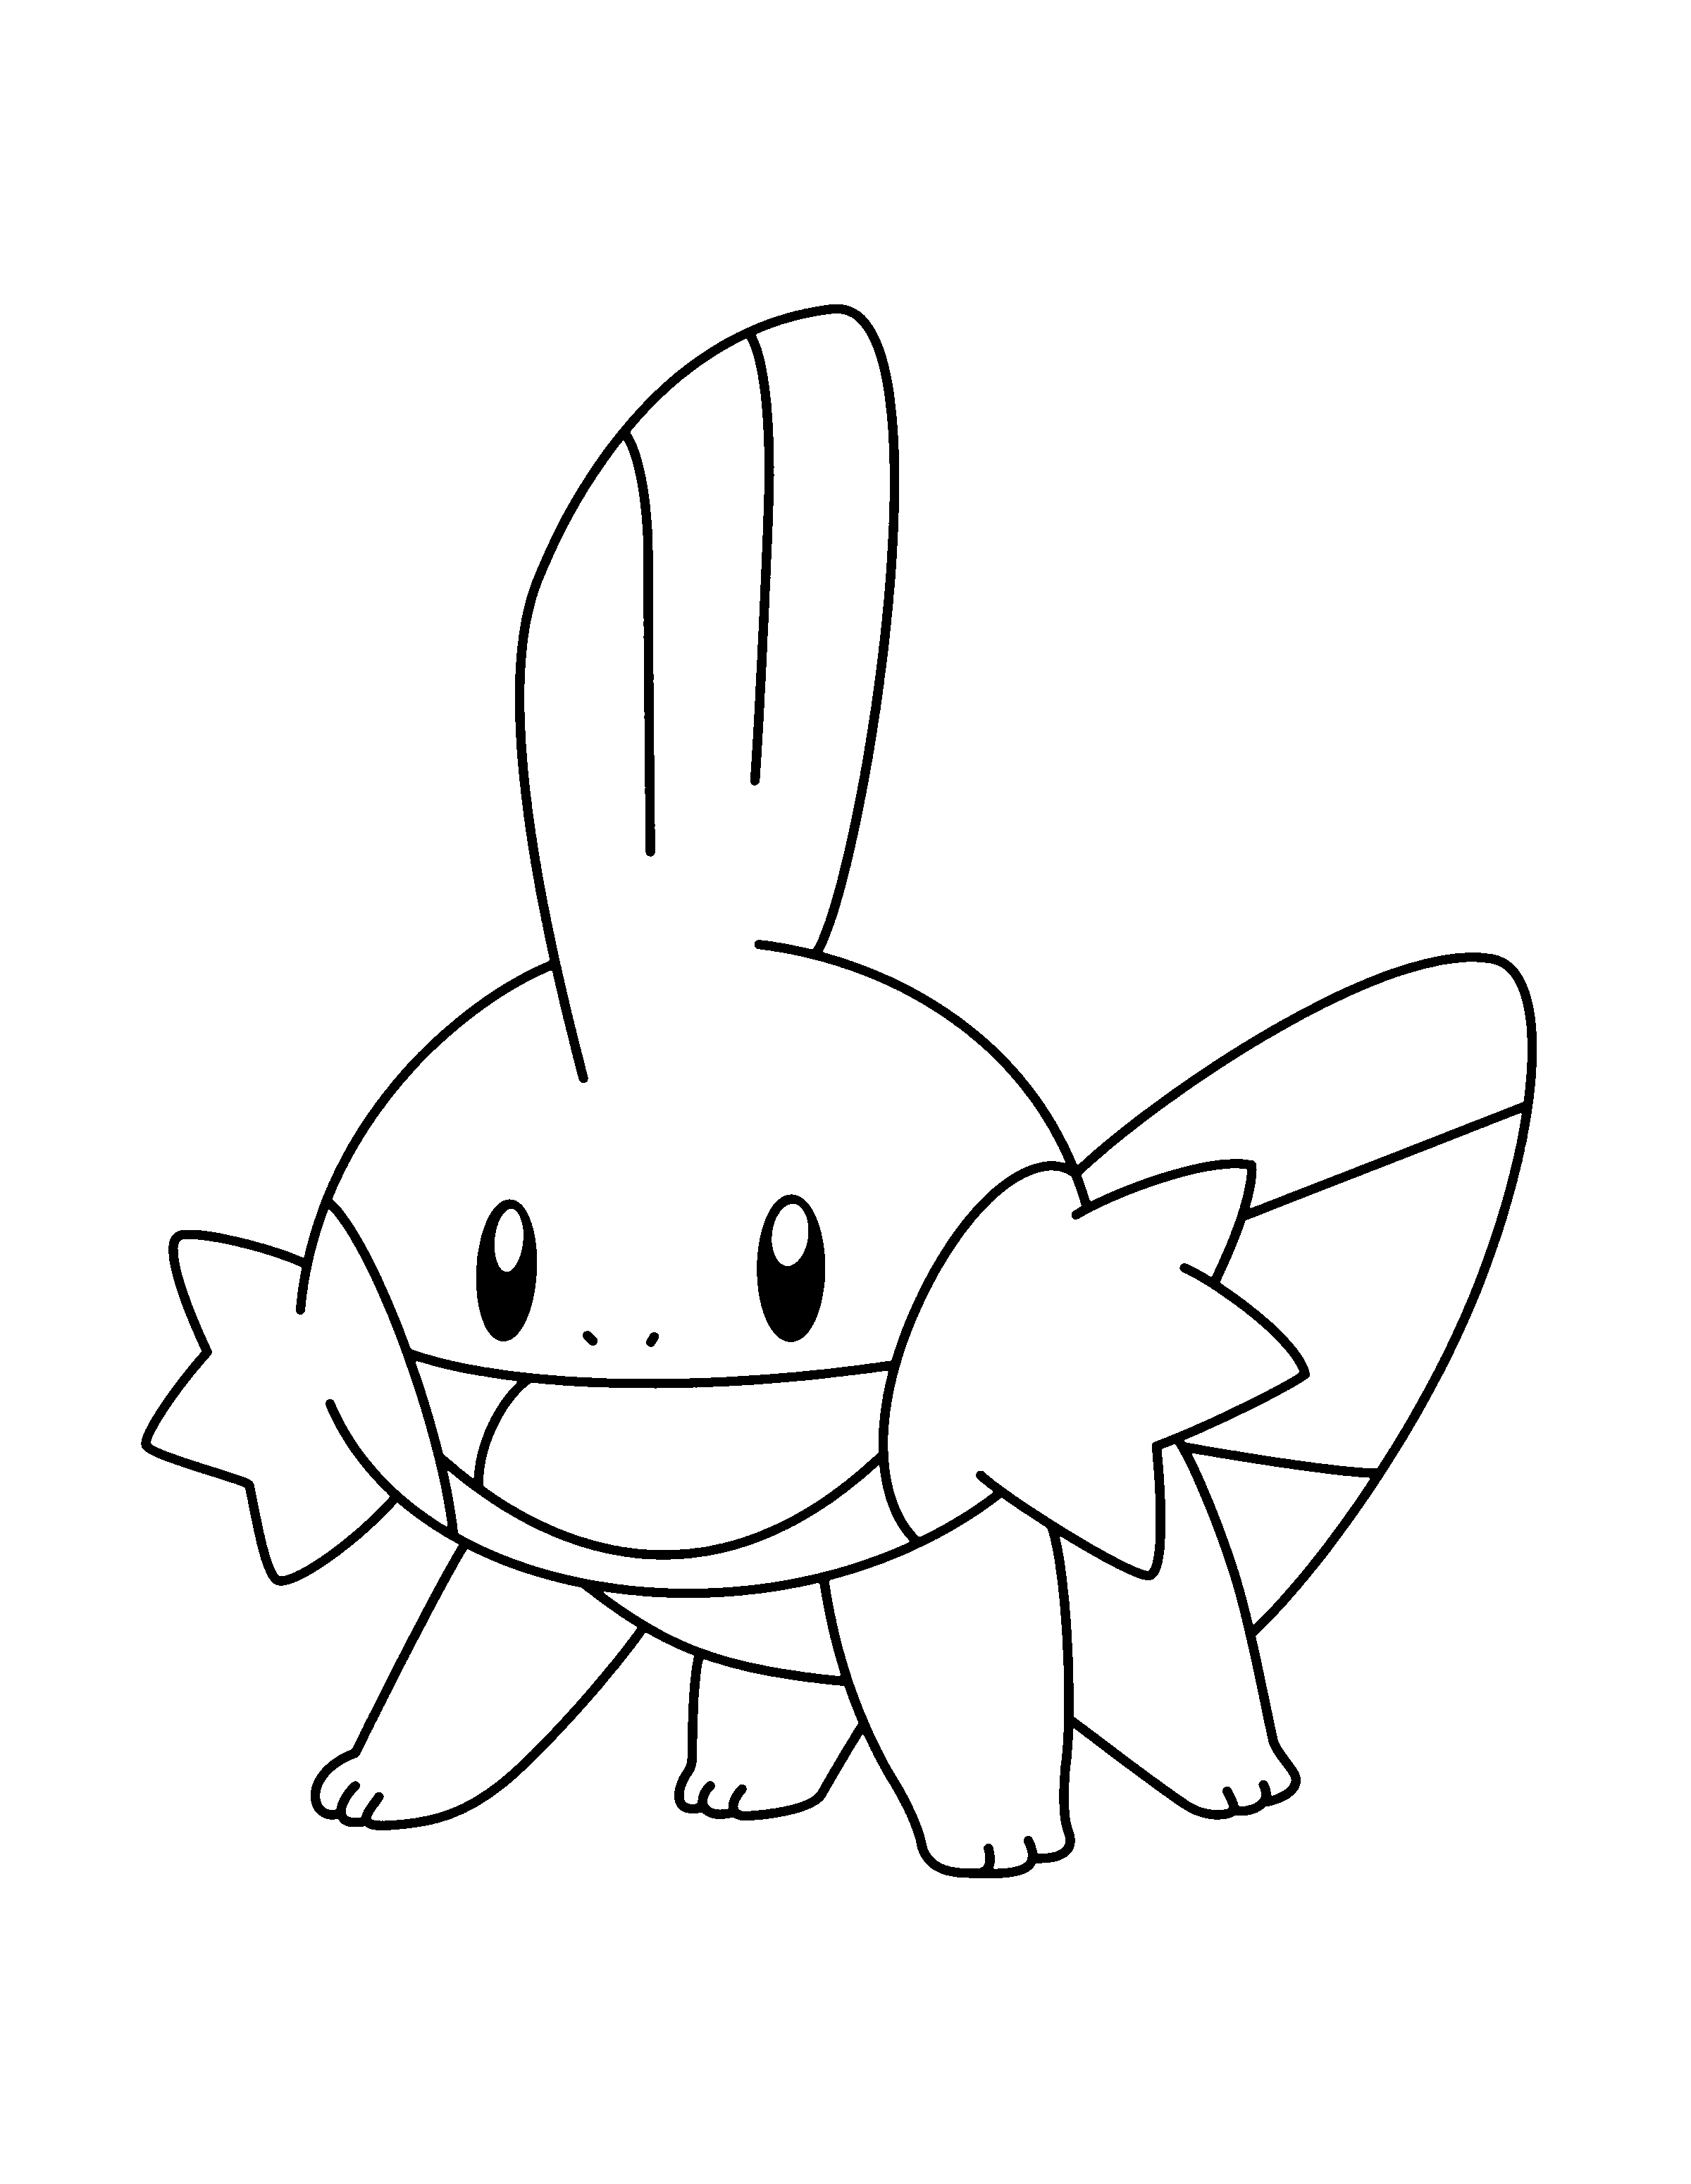 free online coloring pages pokemon black white disegni da colorare disegni da colorare pokemon nero pokemon pages online black white coloring free 